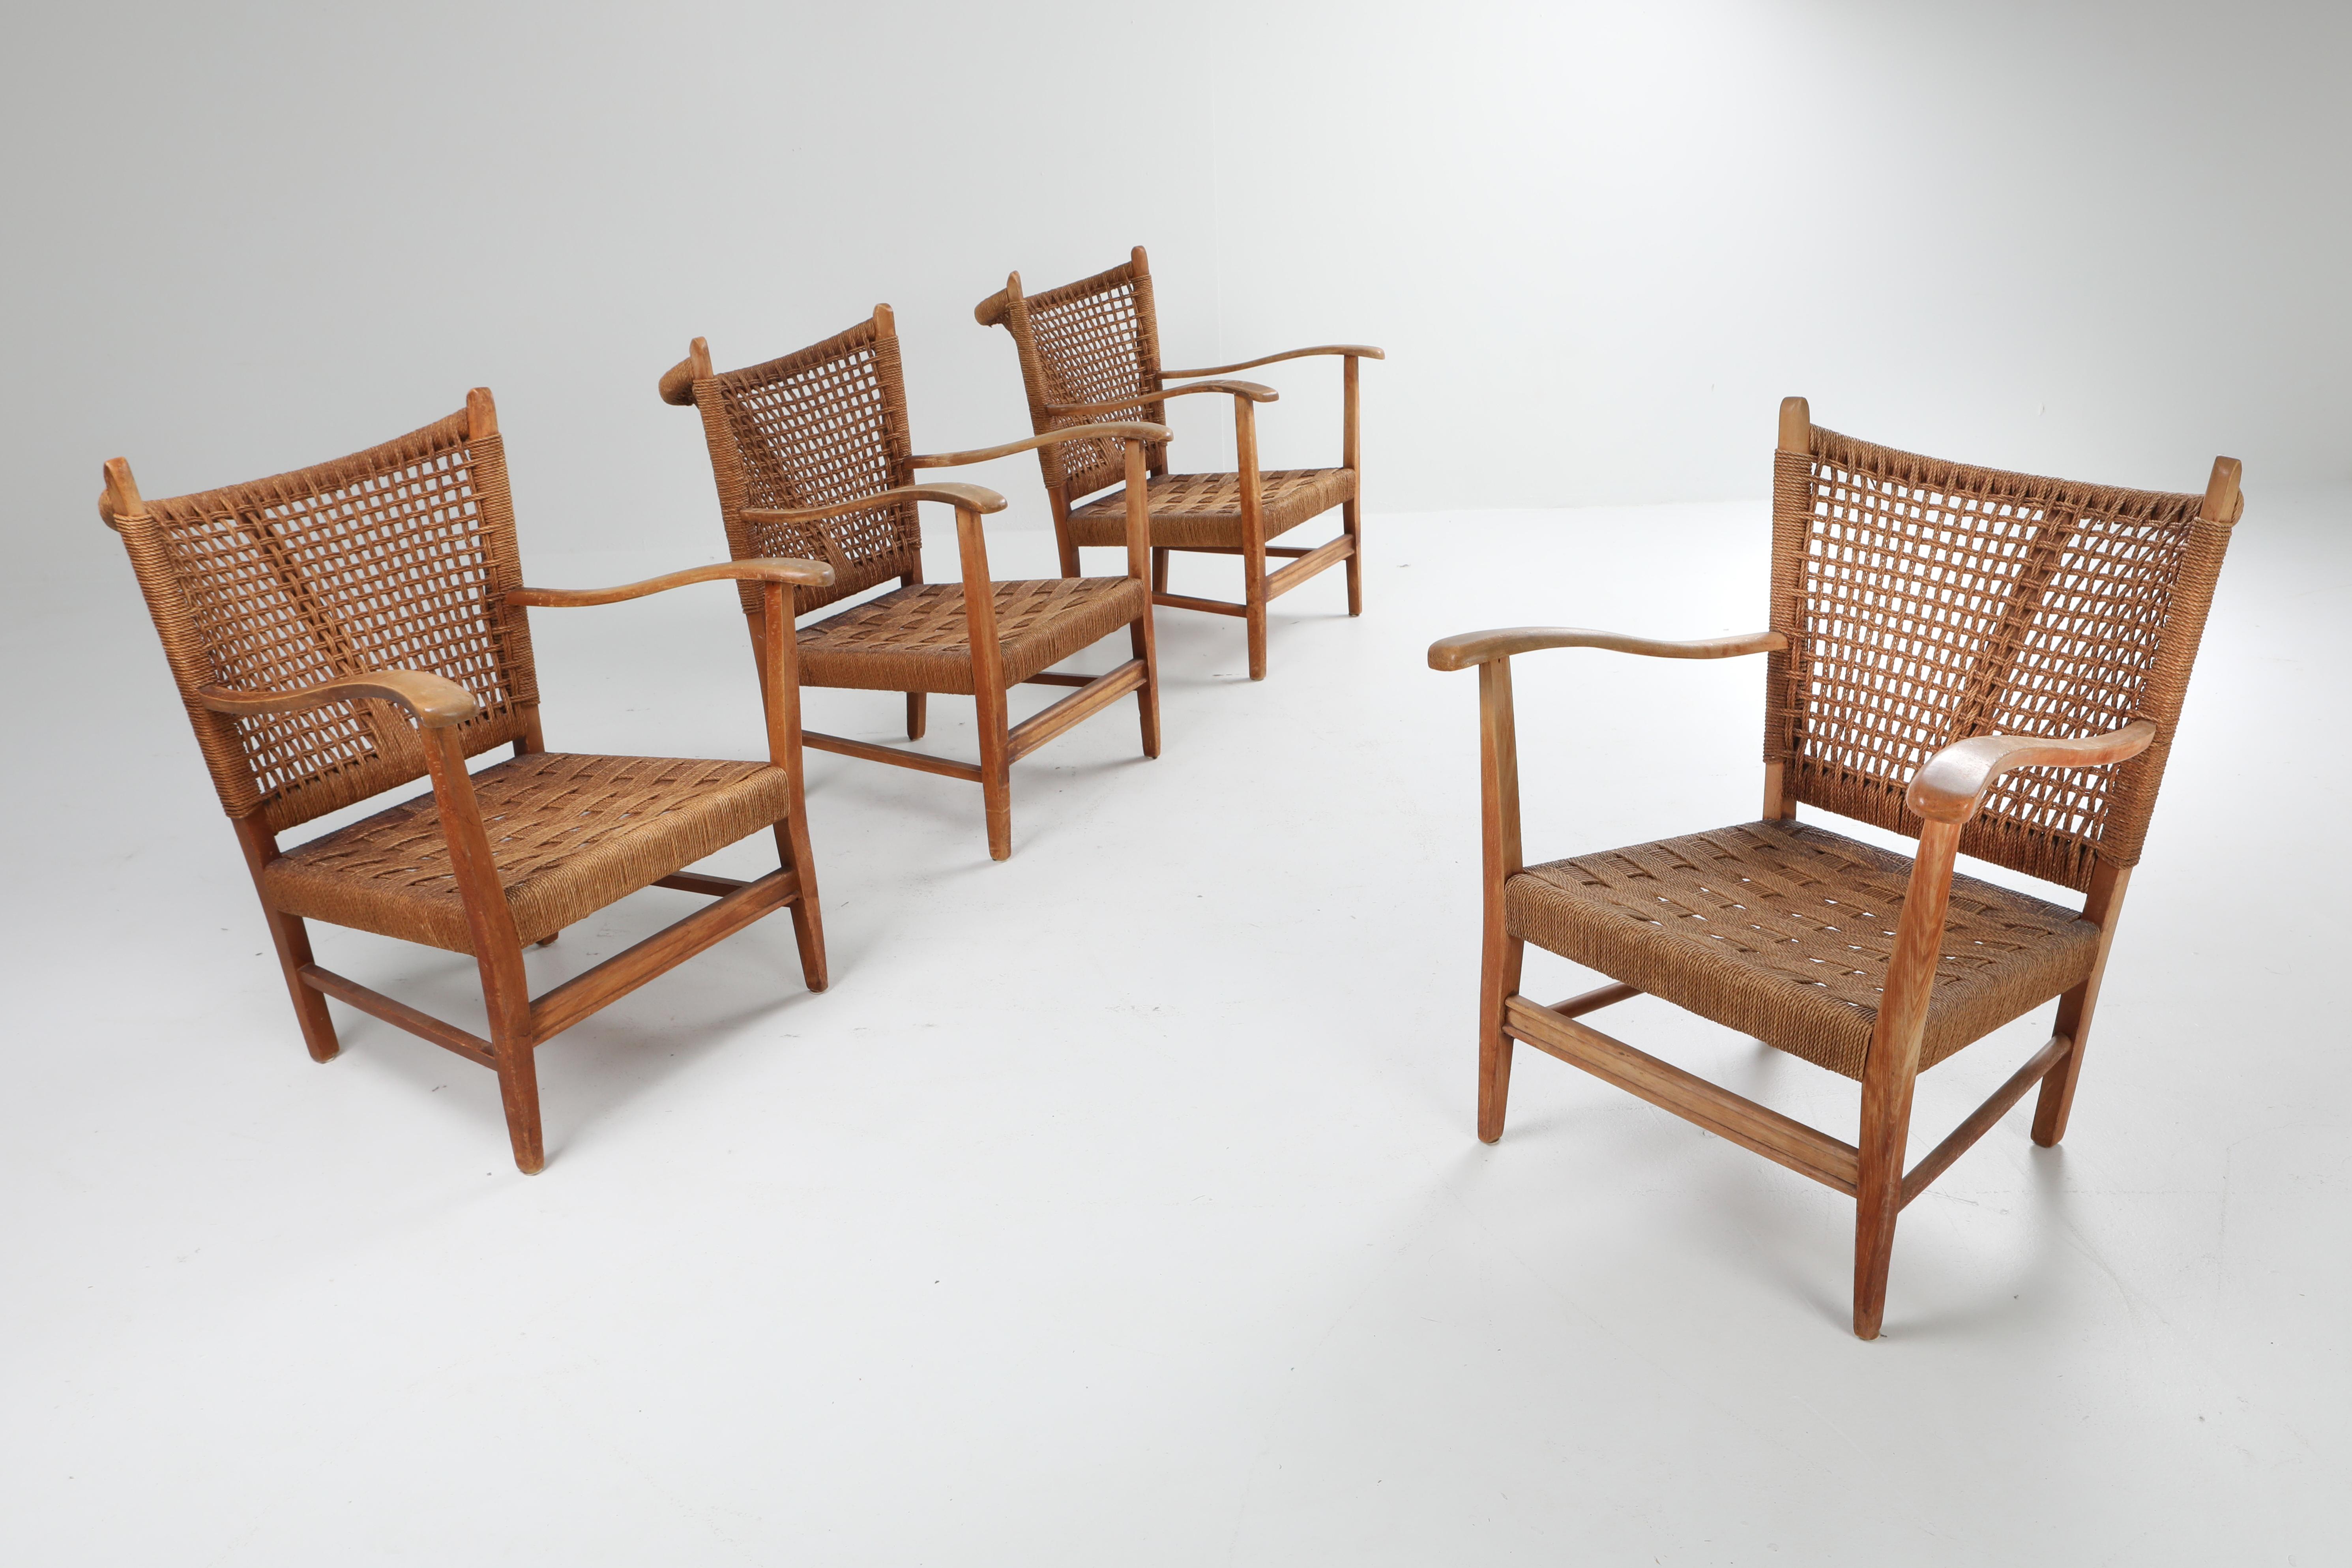 Bast Van Pelt, oak and cord armchairs, set of four, The Netherlands 1950s

Natural and elegant chairs from the 1950s in oak and cord.
Stylisticly referencing to French Art Deco and Scandinavian modernism.
Other designers from the same era and